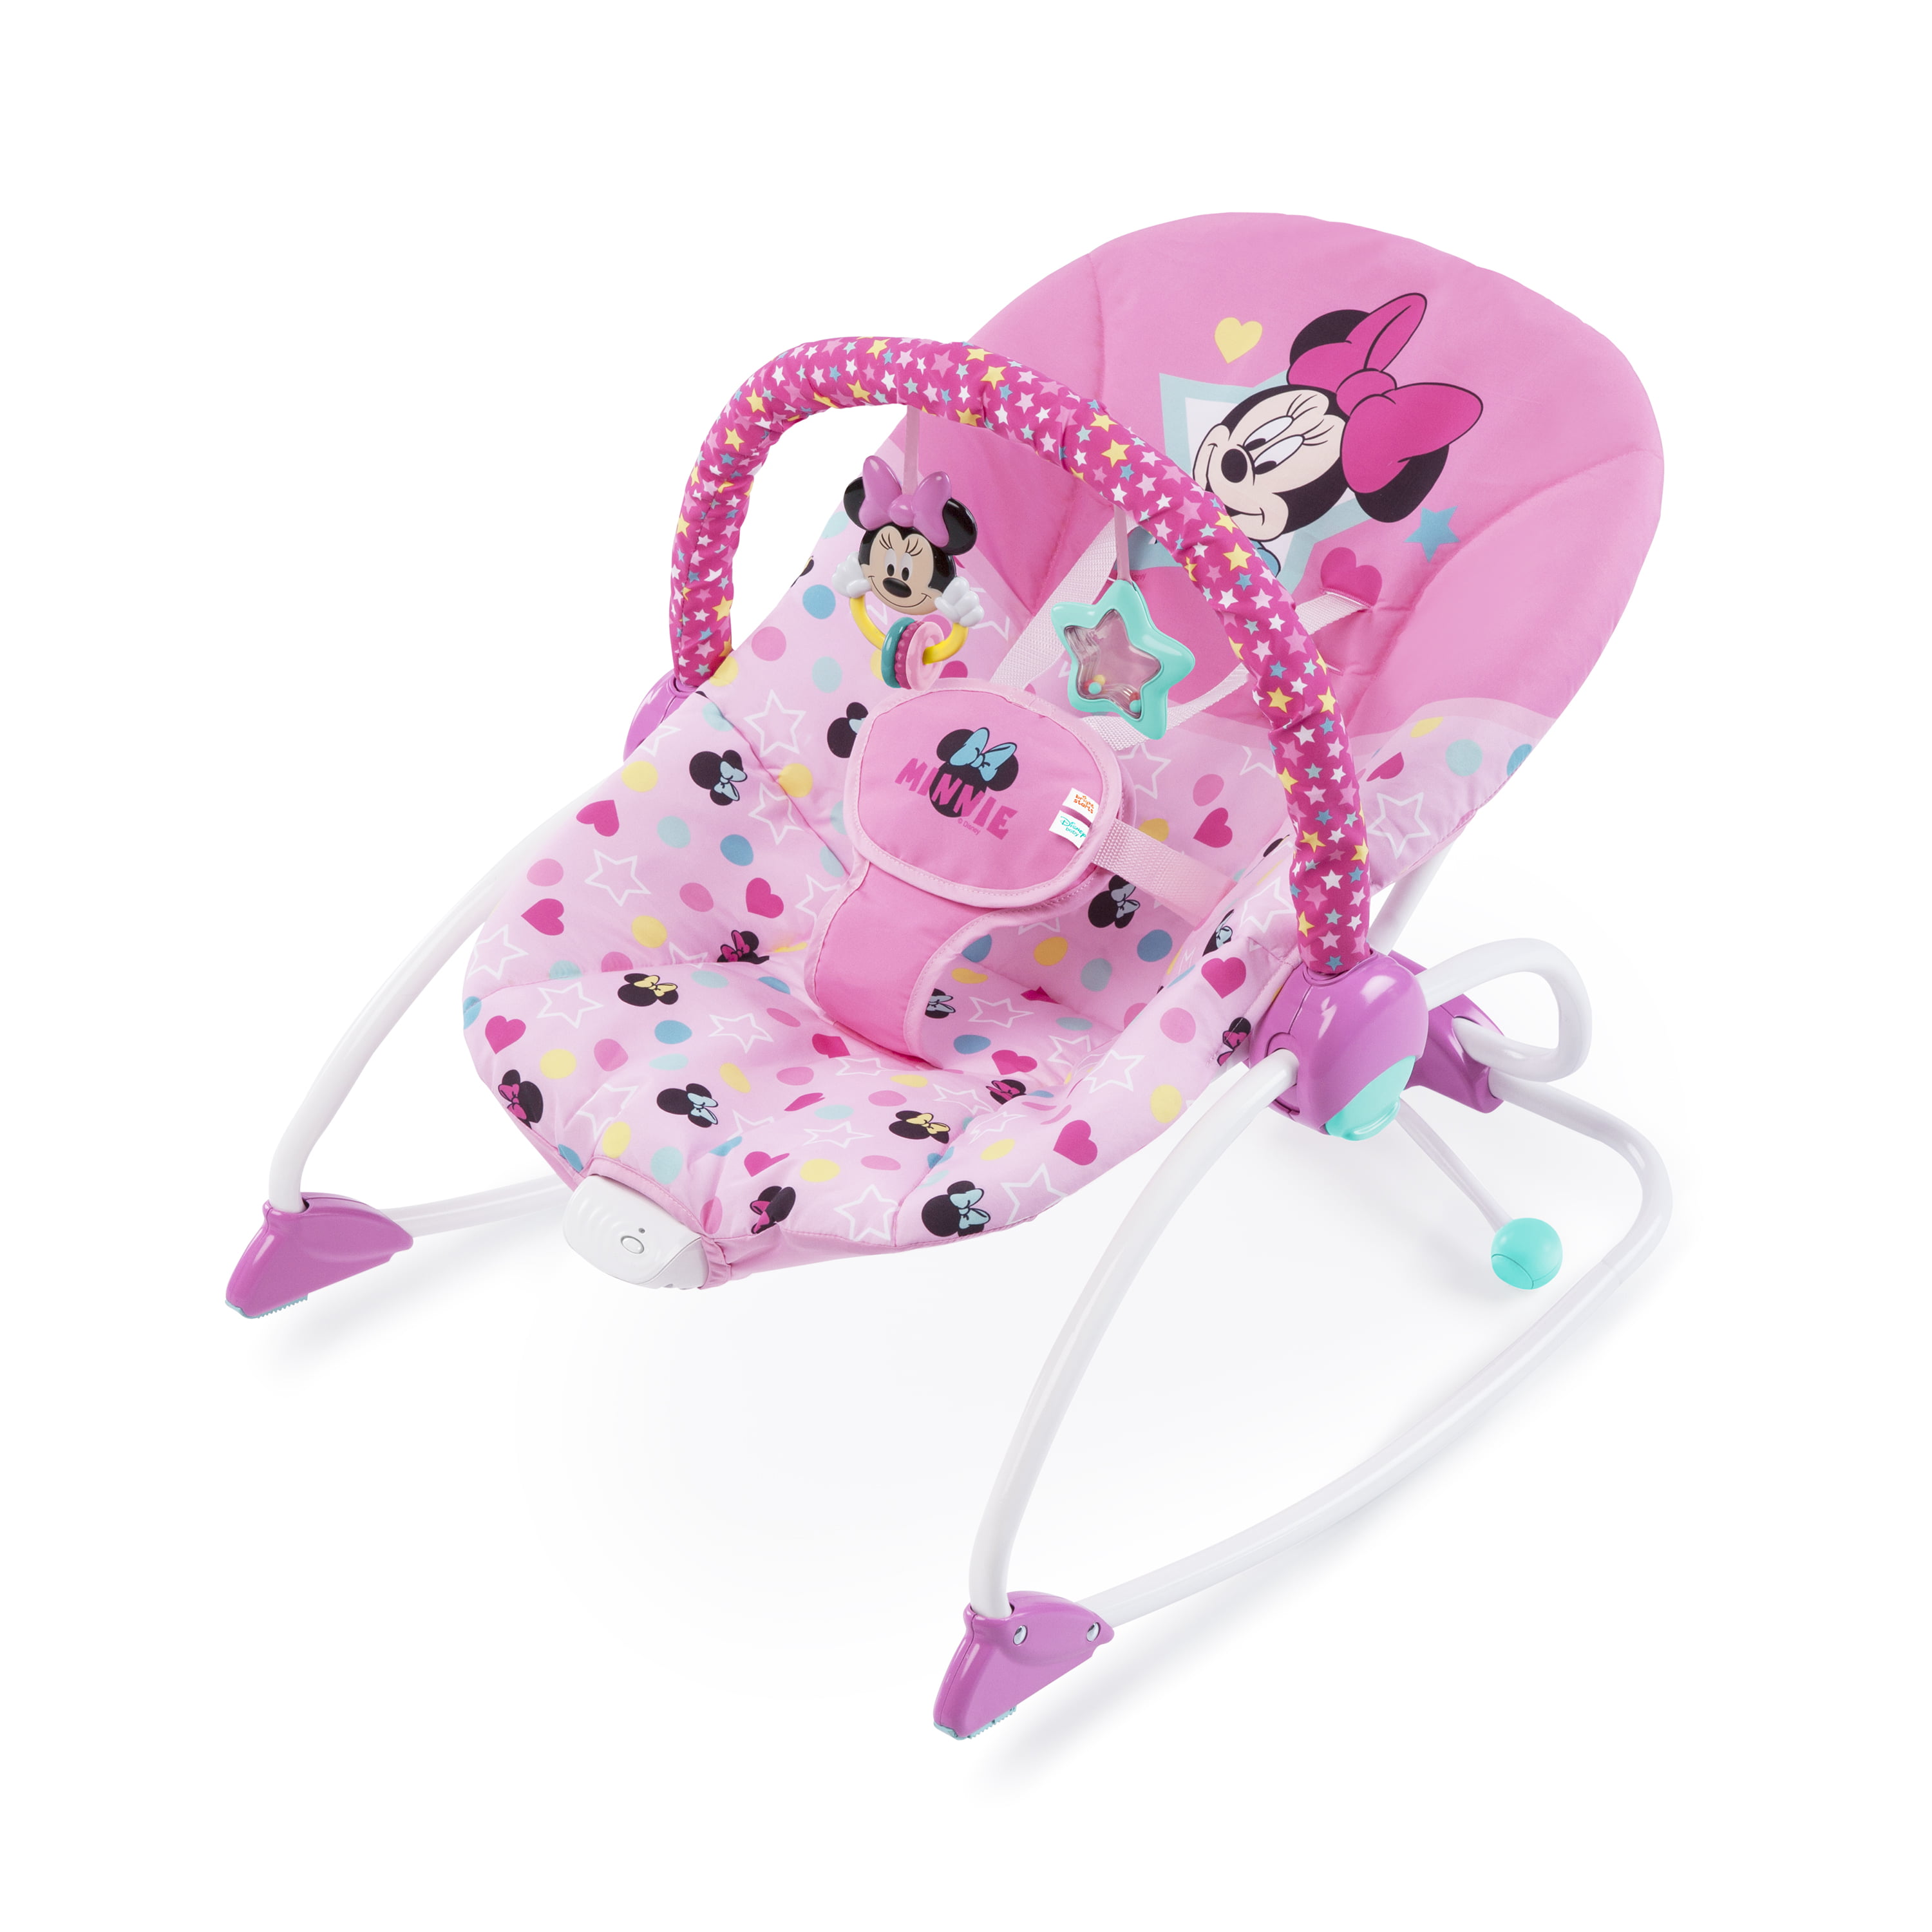 Bright Starts Disney Baby Minnie Mouse Stars Smiles Infant To Toddler Rocker With Soothing Vibration Ages Newborn Walmart Com Walmart Com